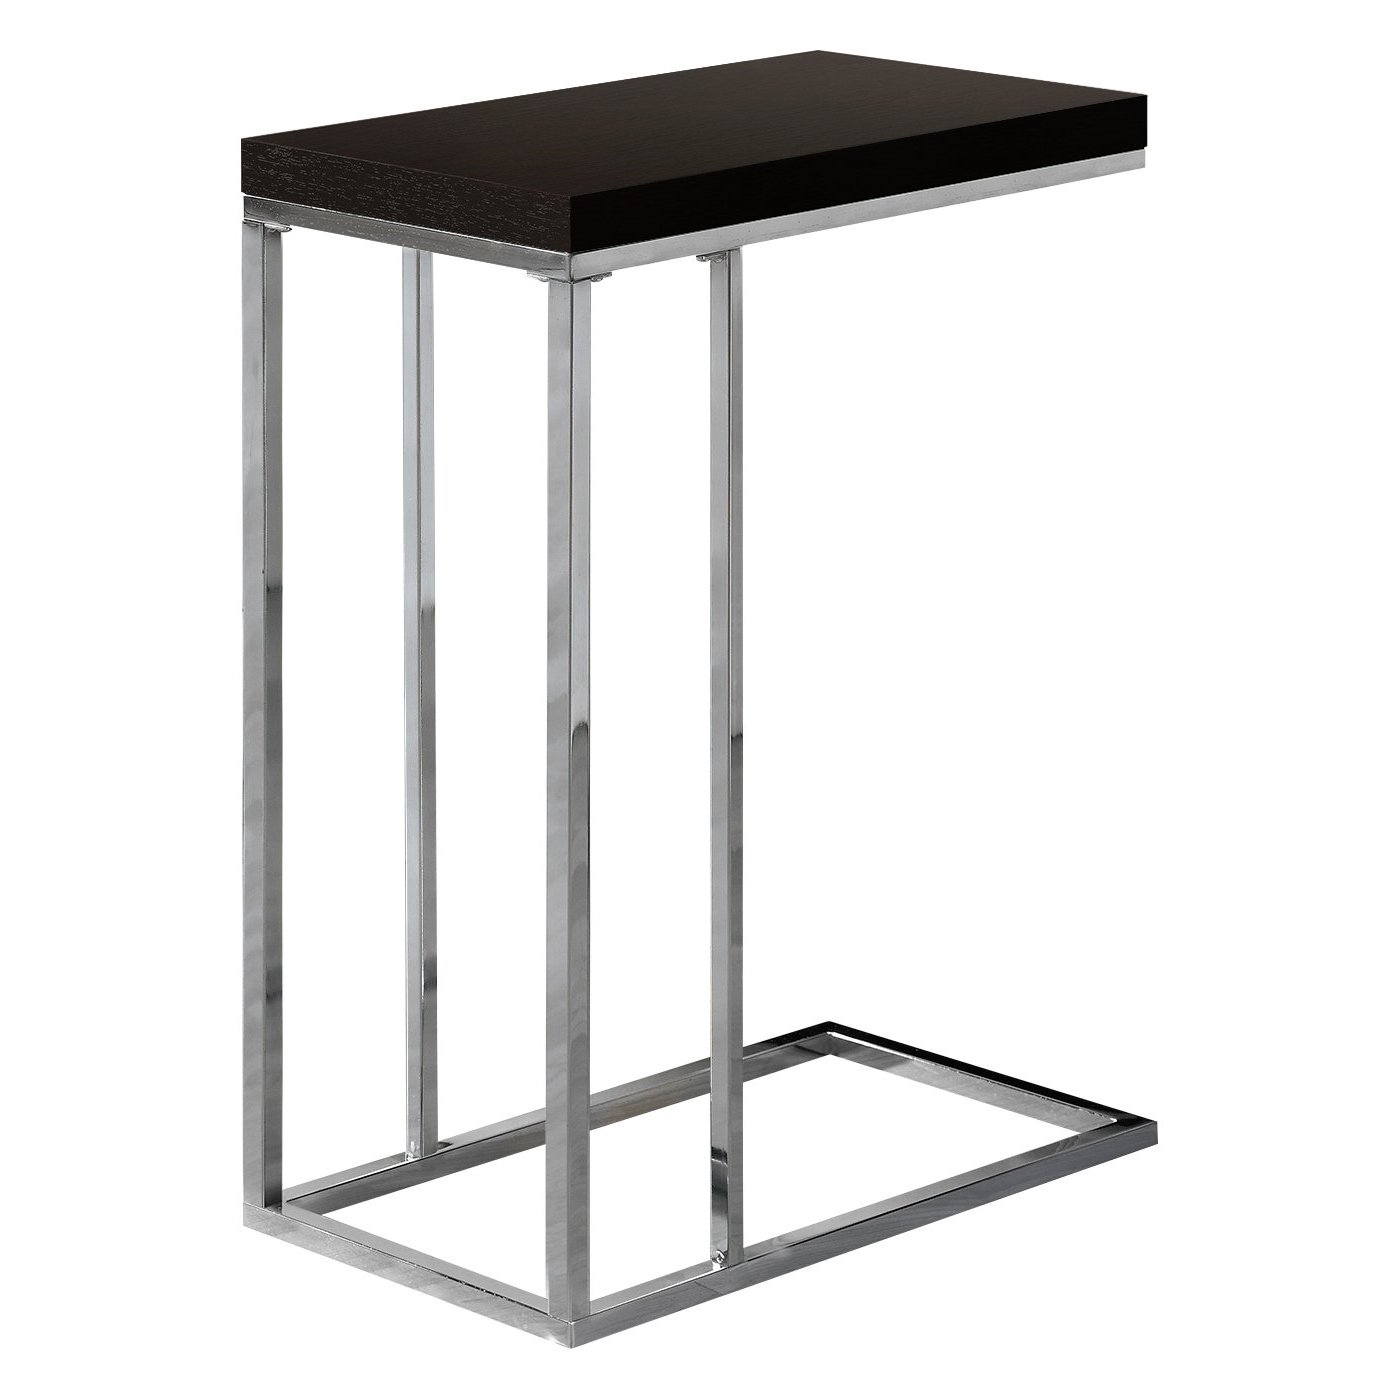 monarch specialties accent table chrome metal mmmstl cappuccino marble bronze kitchen dining ikea furniture floor wine rack outdoor melbourne frame side half moon end beach